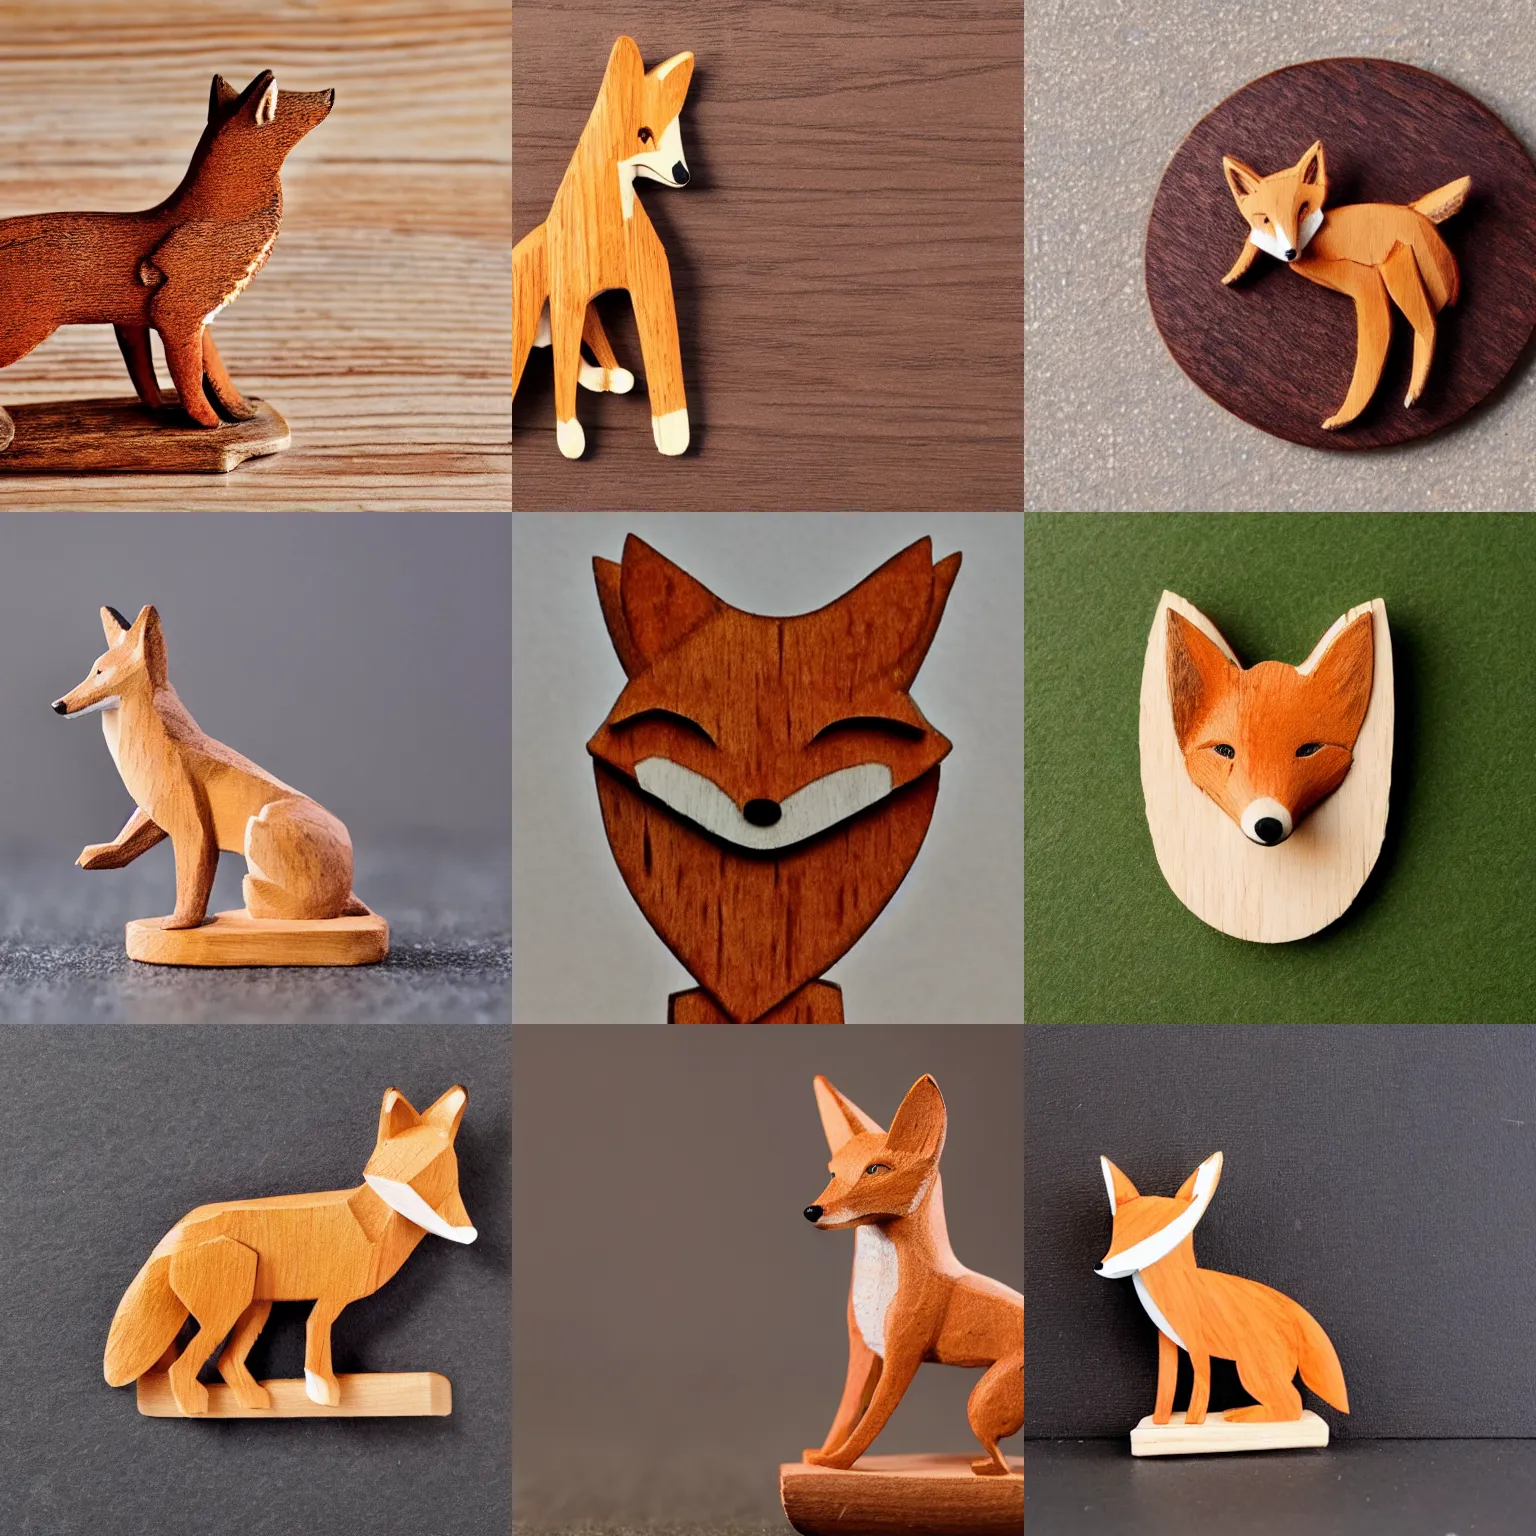 Prompt: A wooden statuette of a fox on a piece of cracker. solid Background.